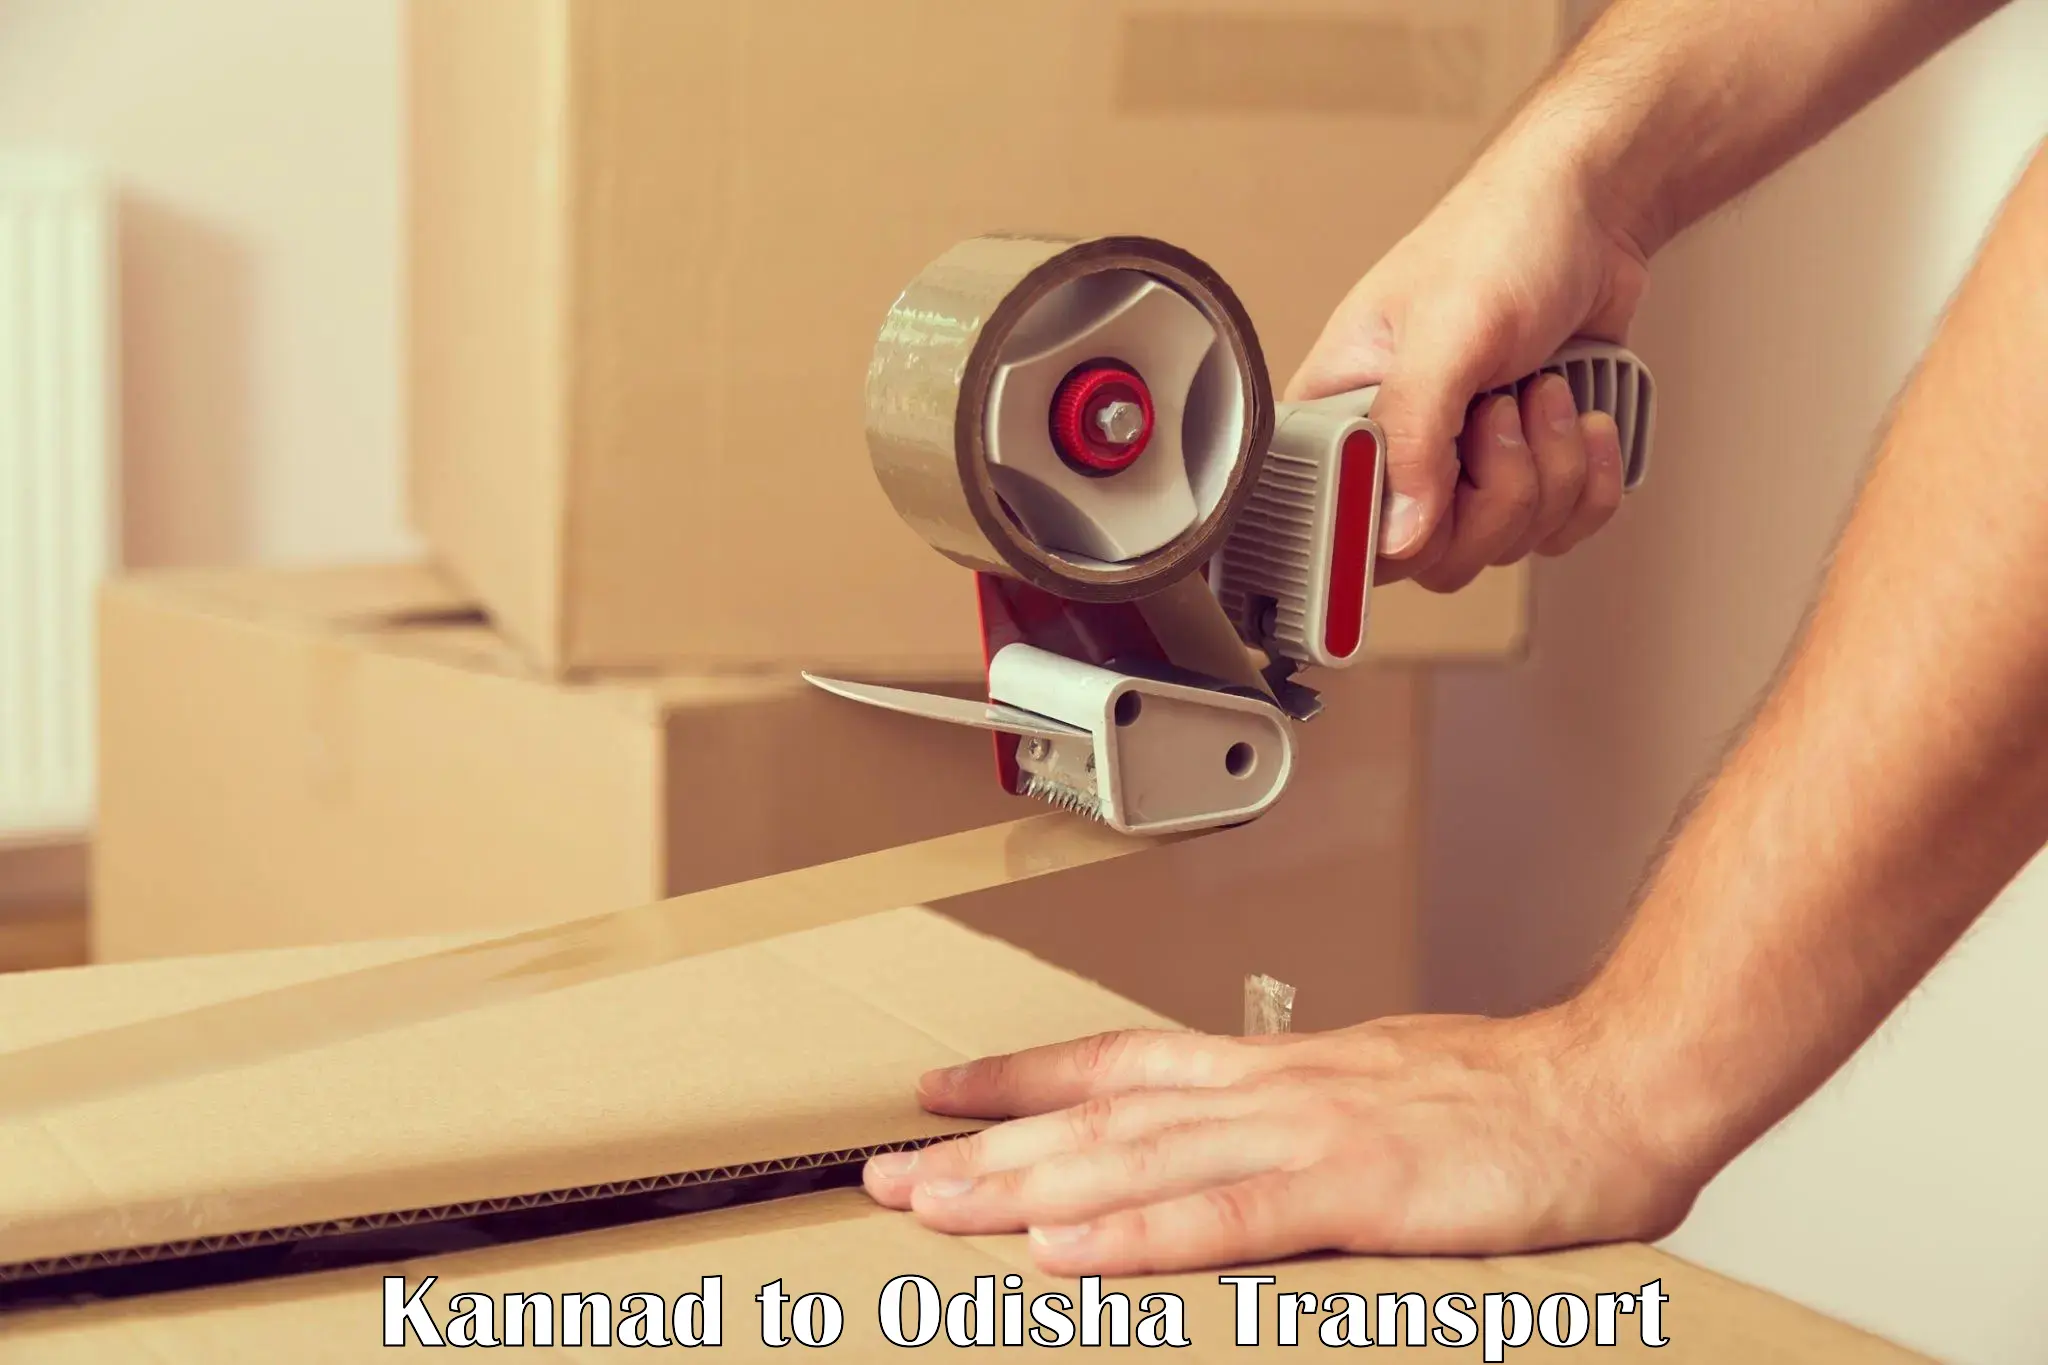 Air freight transport services Kannad to Paradip Port